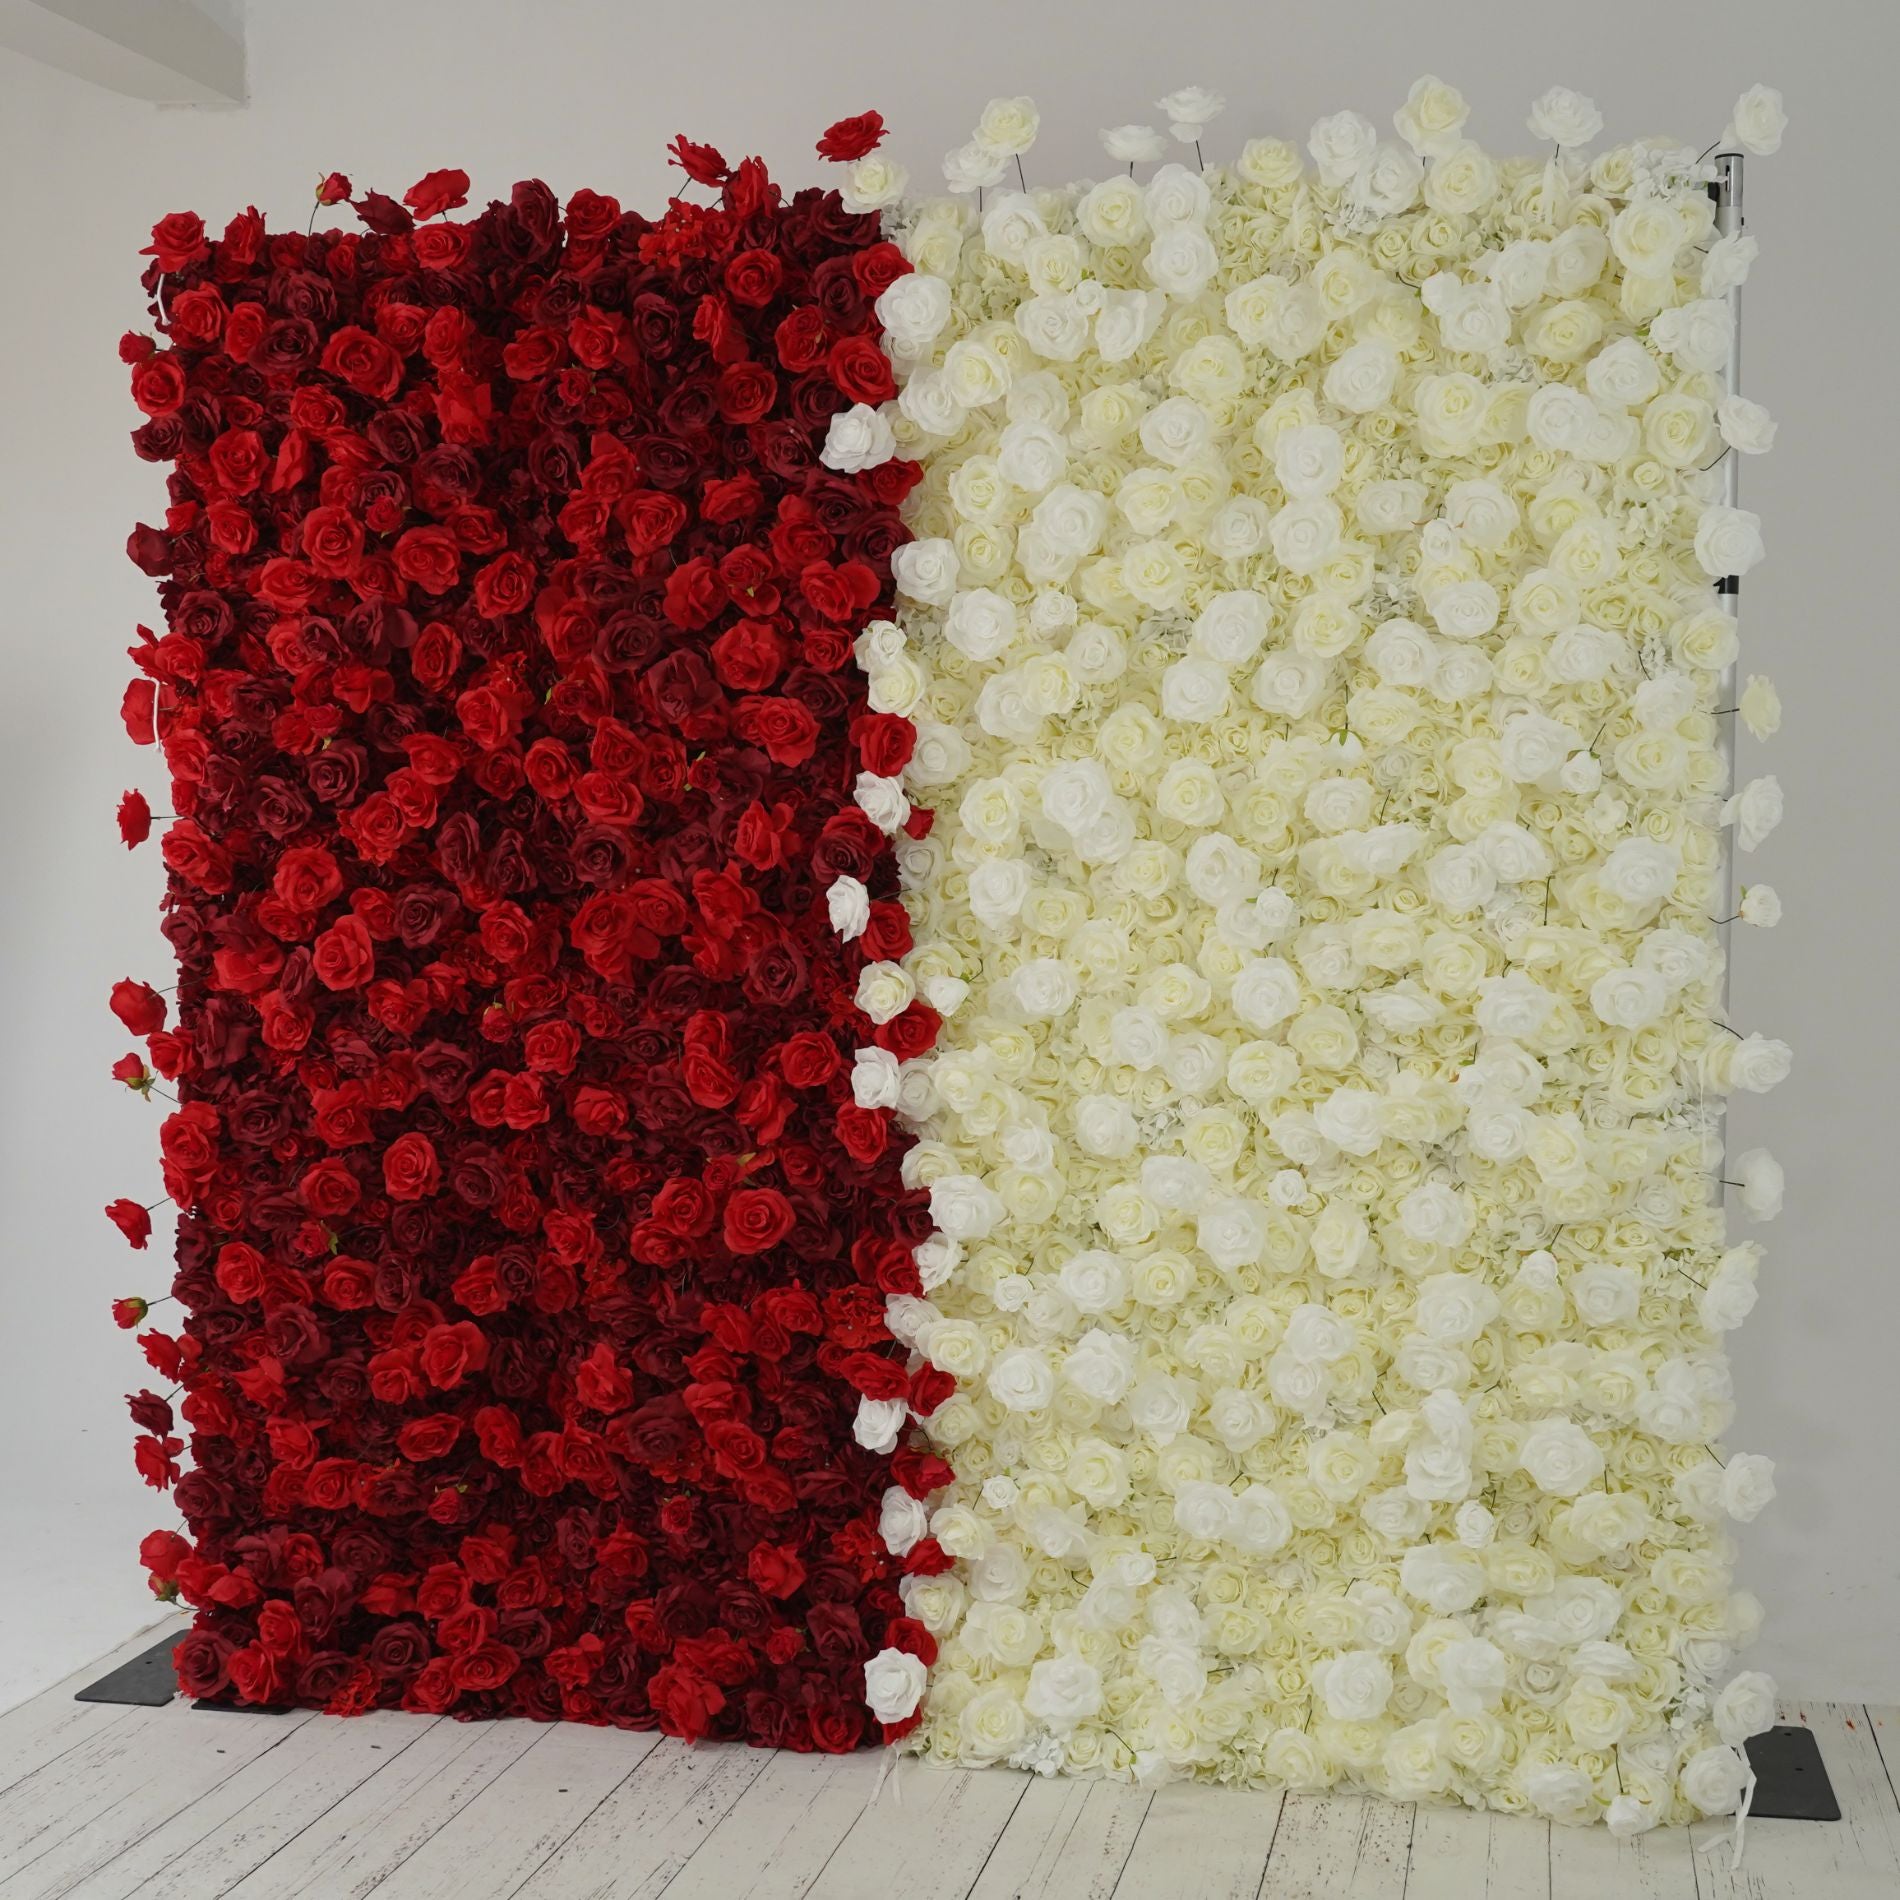 Flower Wall Red and White Roses Fabric Rolling Up Curtain Floral Backdrop Wedding Party Proposal Decor